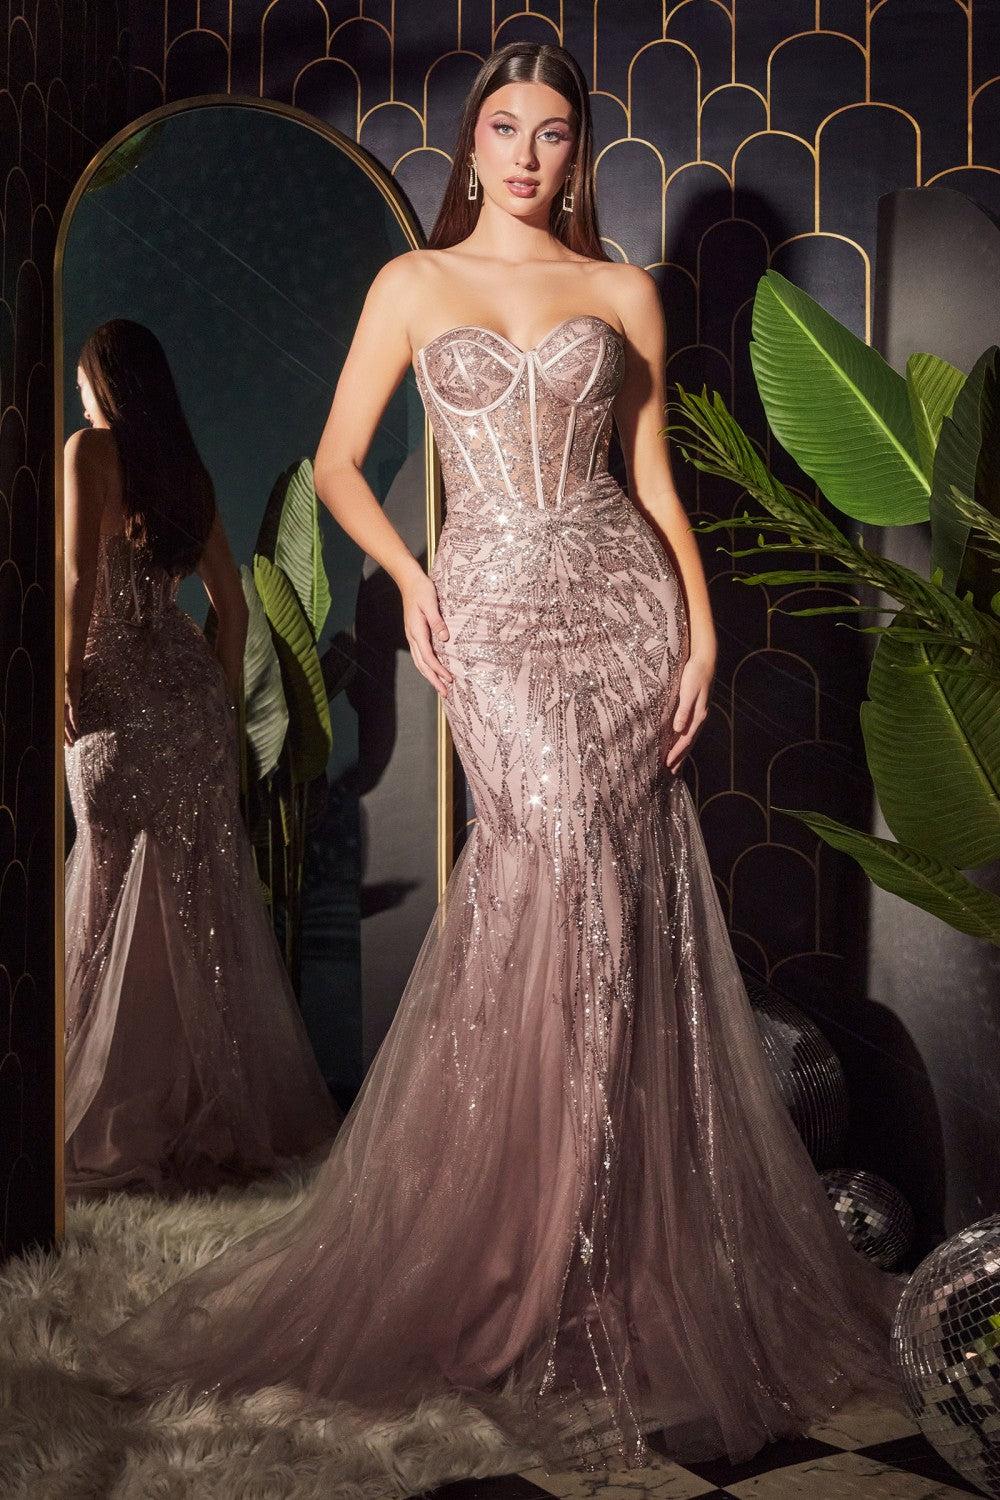 Dusty-rose Glitter Strapless Mermaid Gown CB116 - Women Evening Formal Gown - Special Occasion